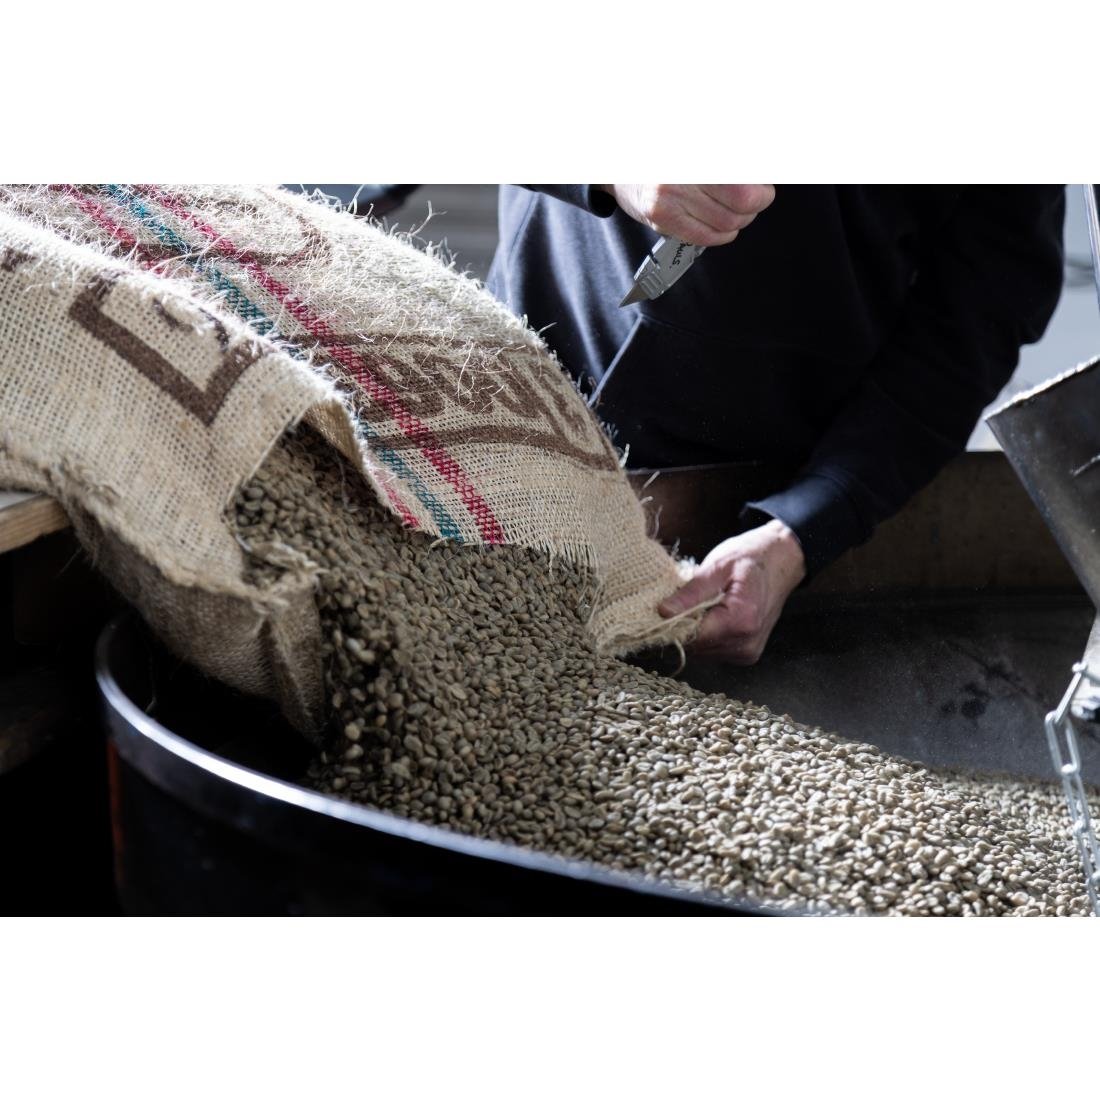 HS532 Beaumont No.3 Excelso Coffee Beans 1kg